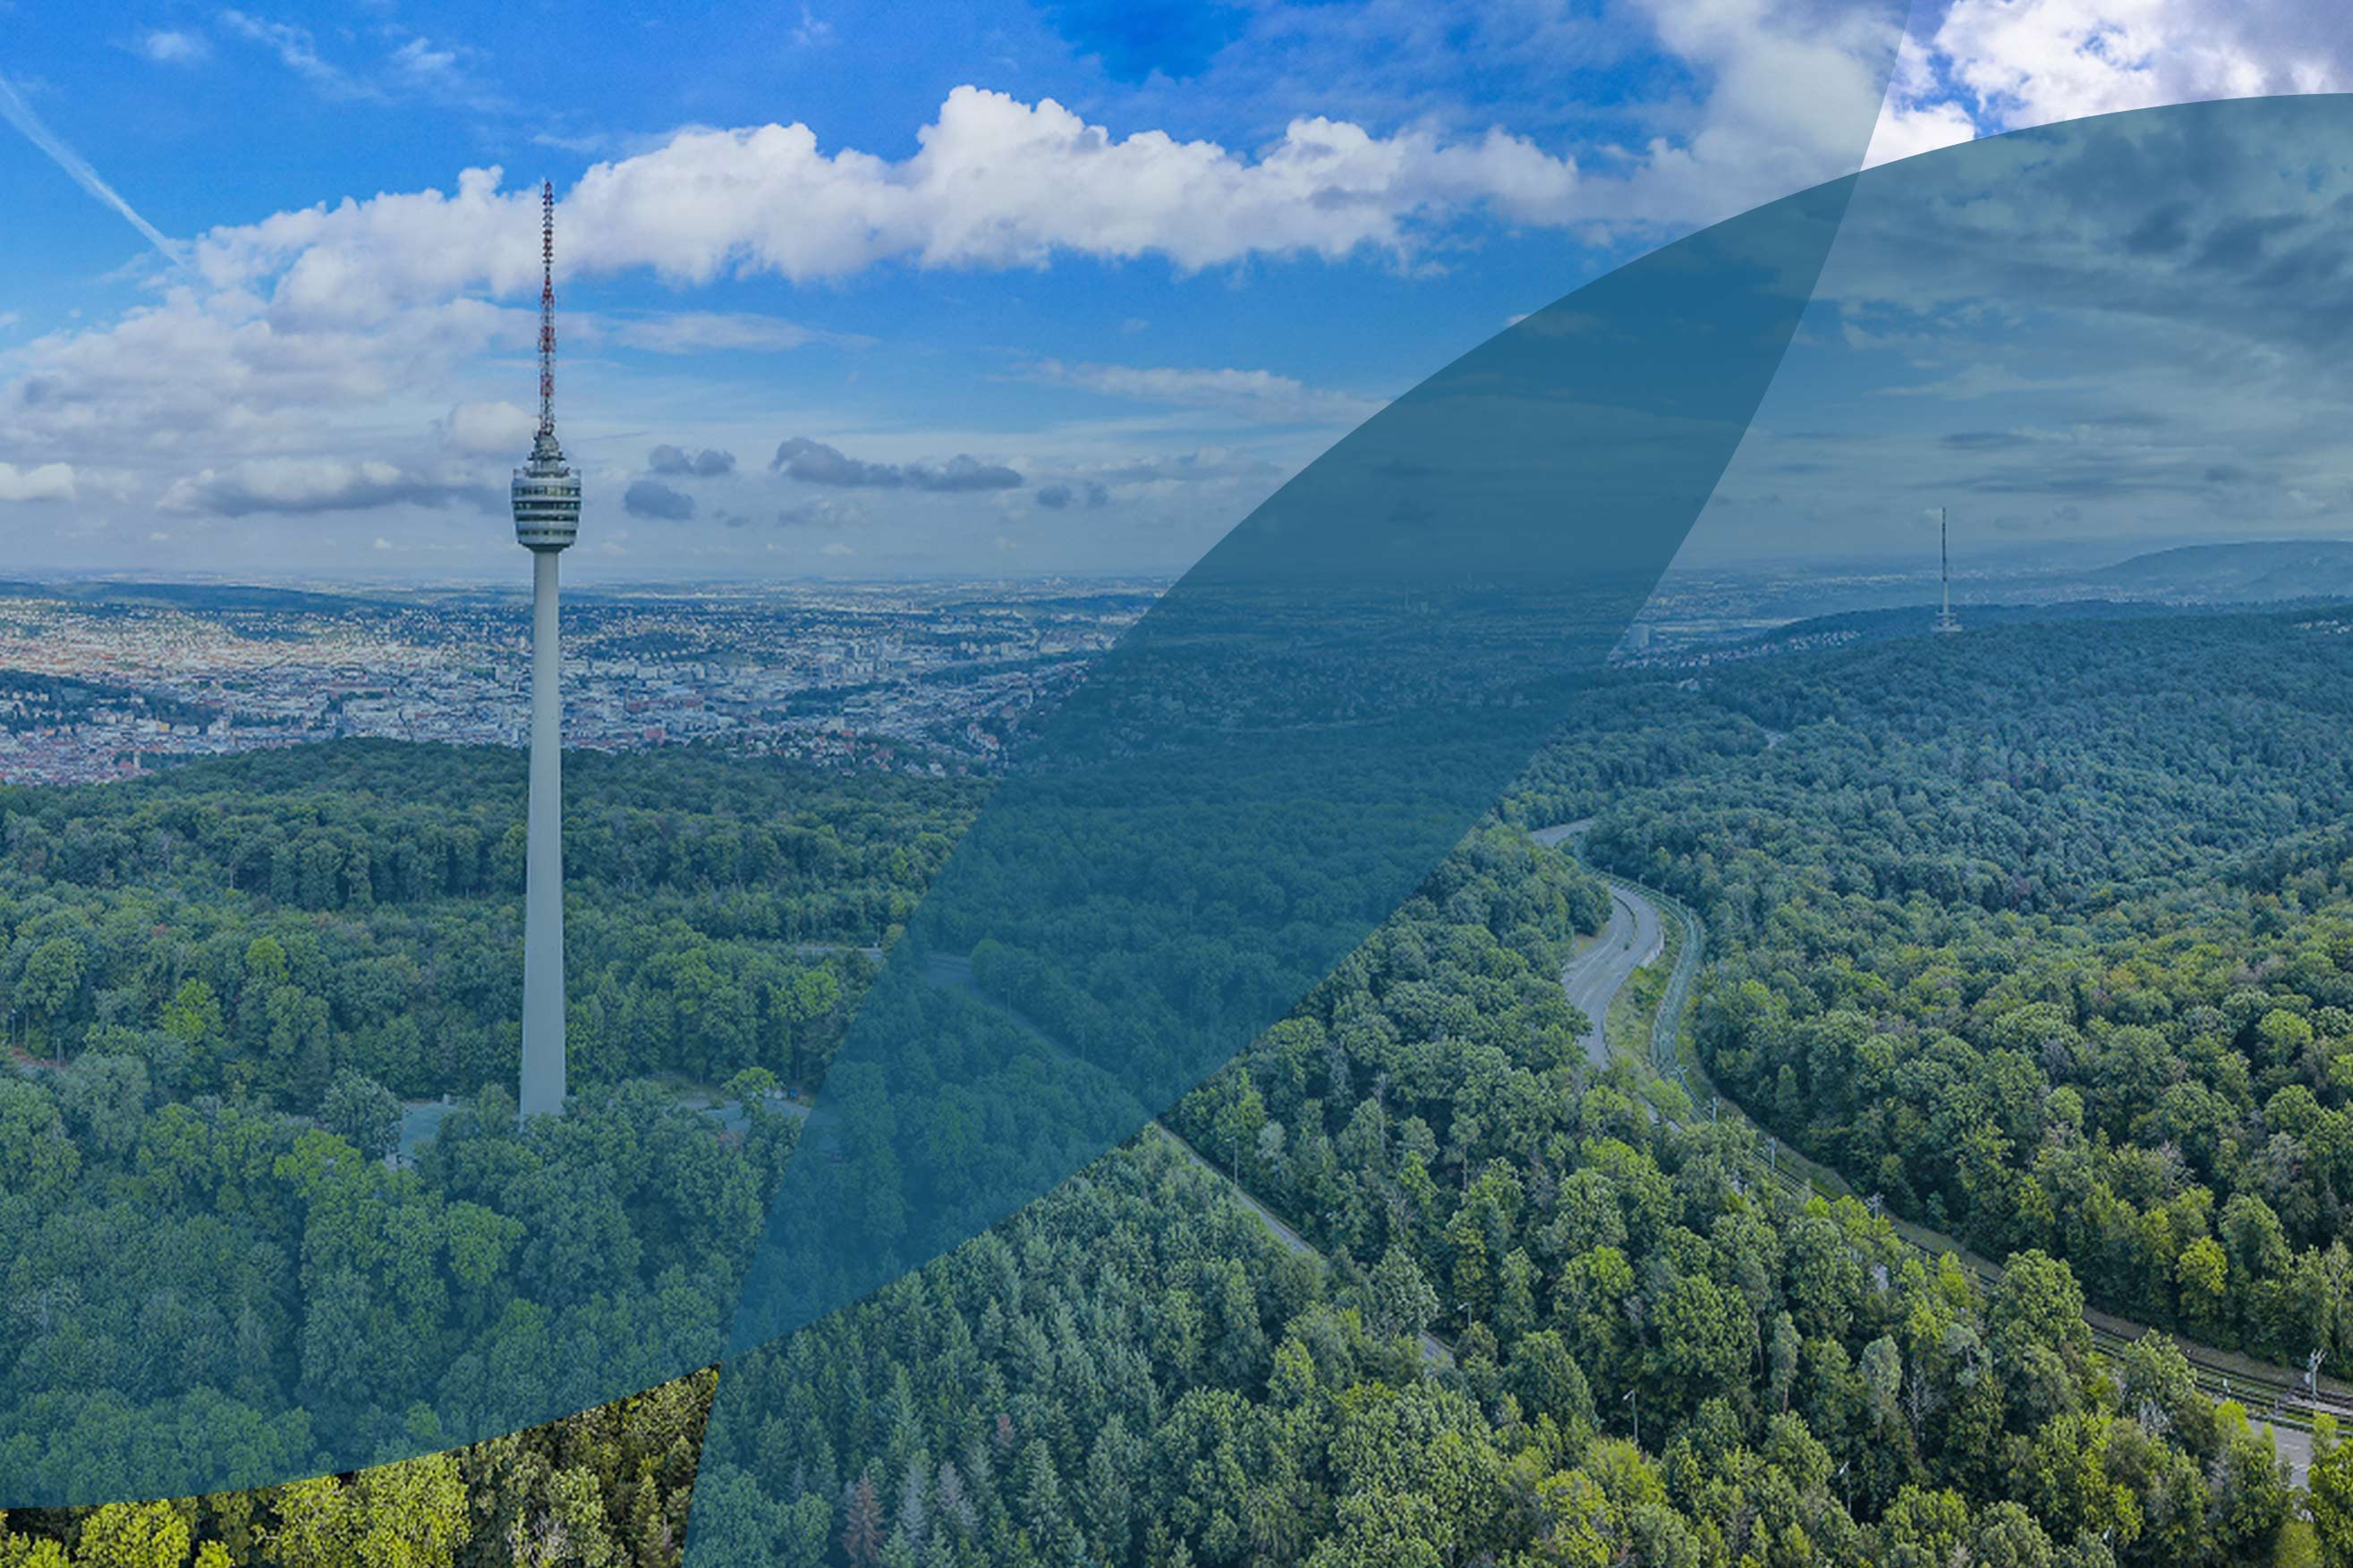 View of the Stuttgart Fernsehturm, which is surrounded by forest and nature.